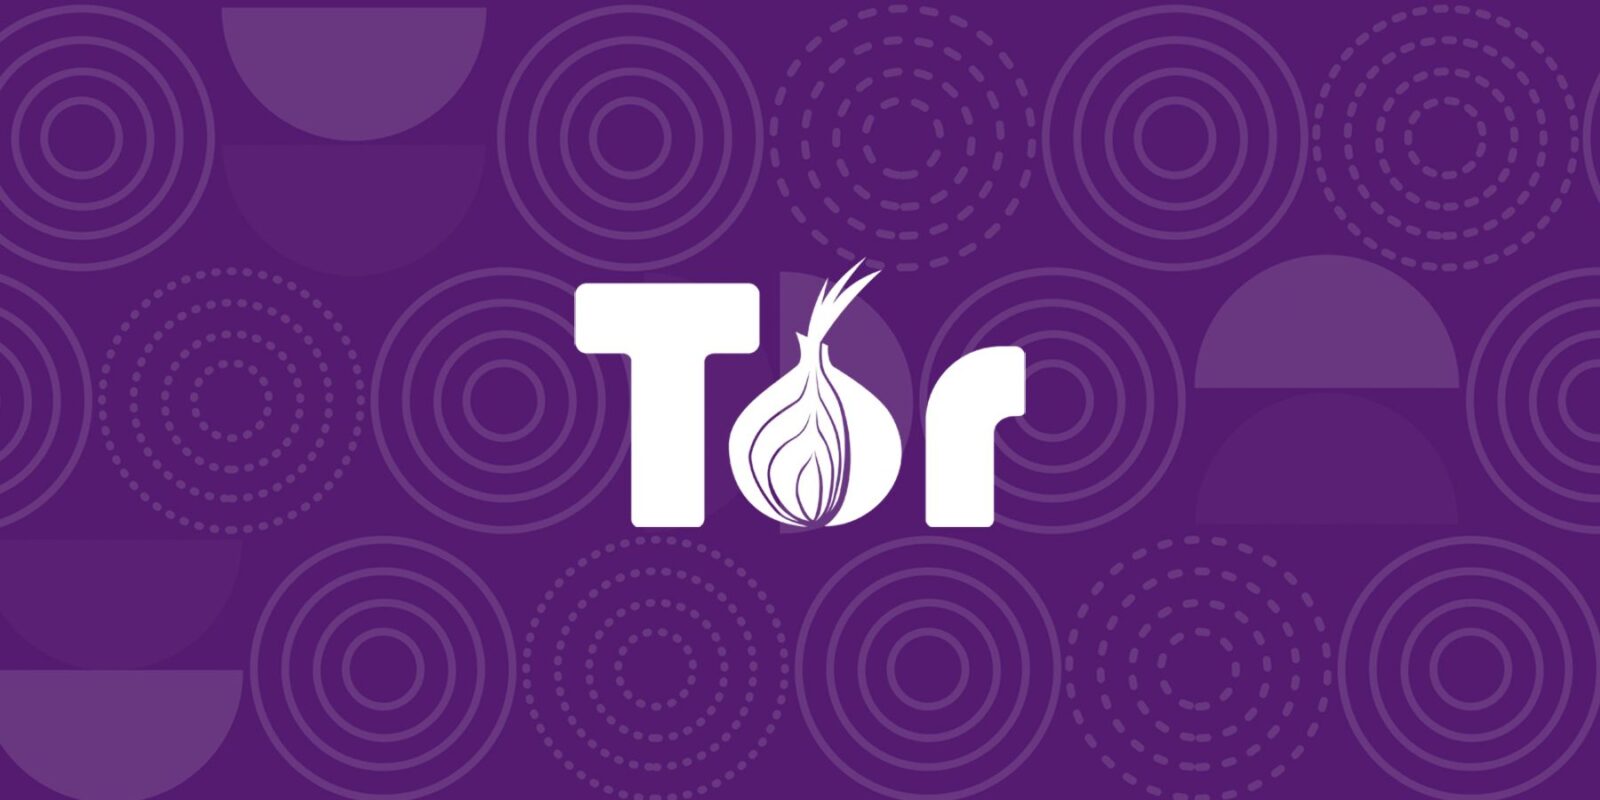 TOR Browser Cover